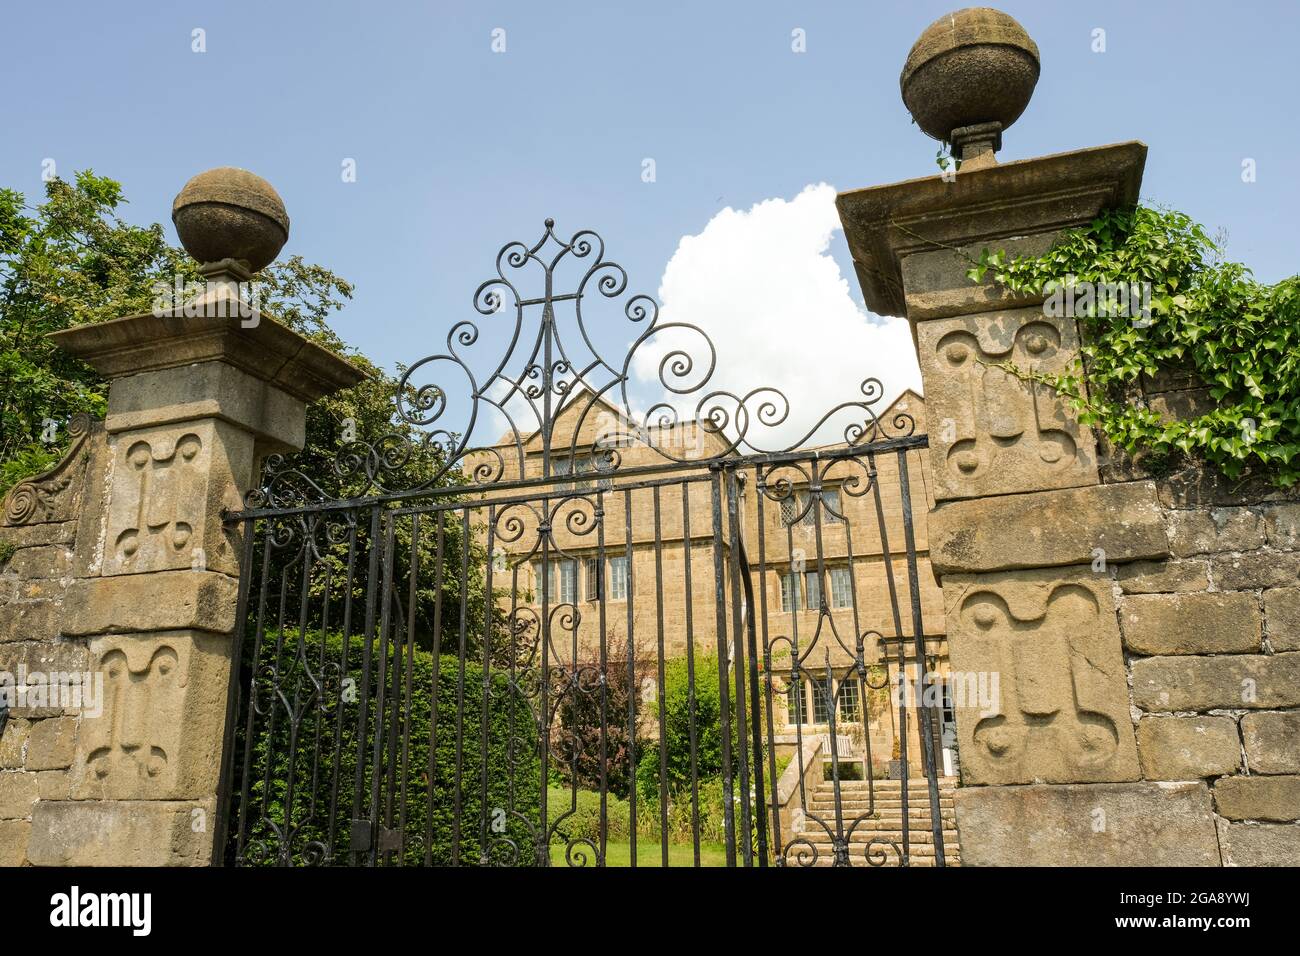 Distinctive gates to the Hall in the Derbyshire plague village of Eyam. Wrought iron gates and huge stone pillars provide an impressive entrance. Stock Photo